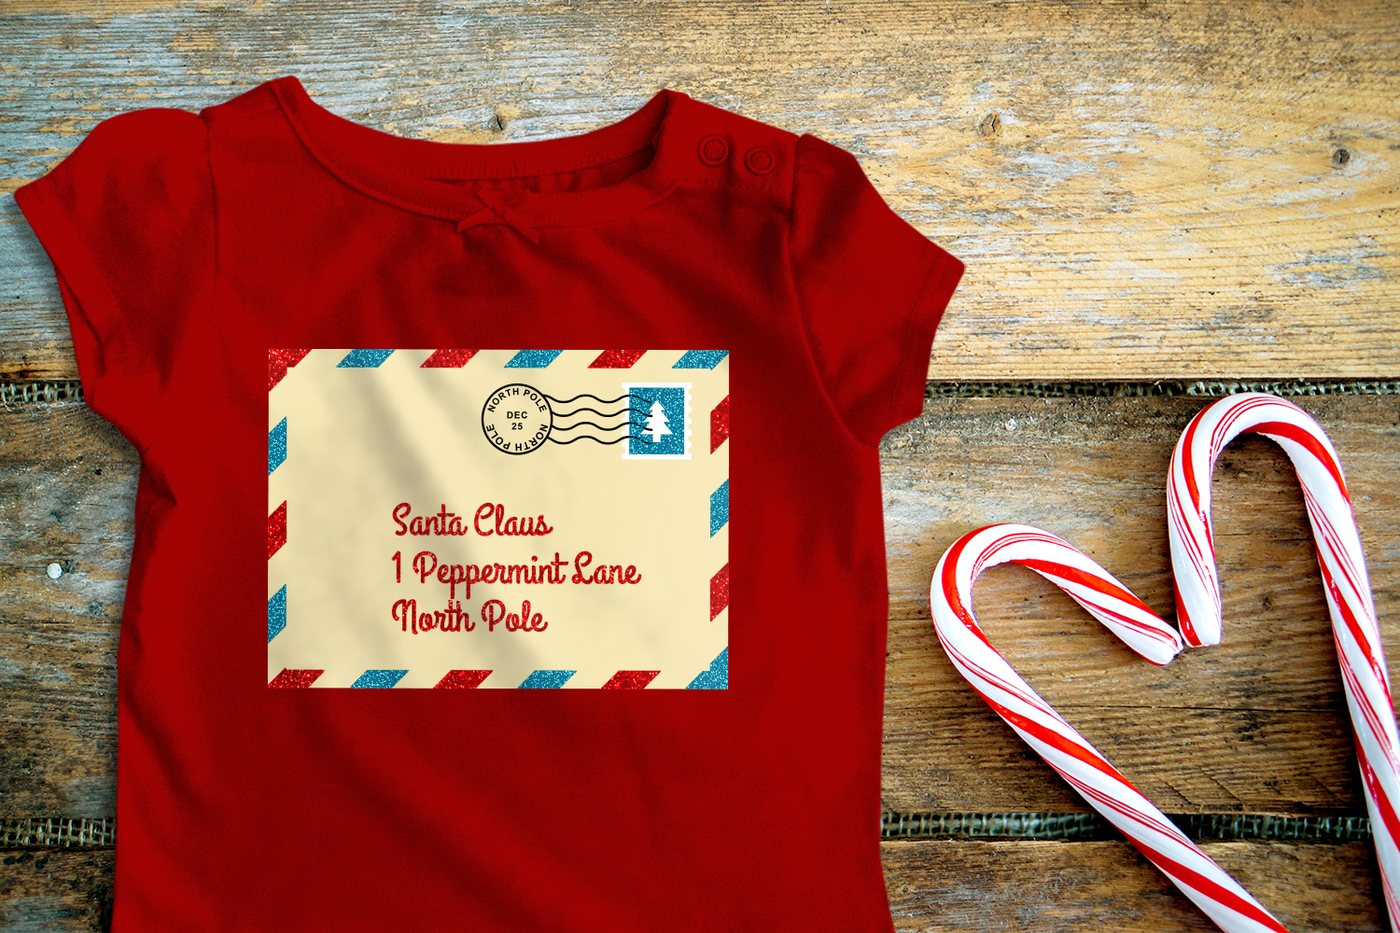 Design with a letter addressed to Santa